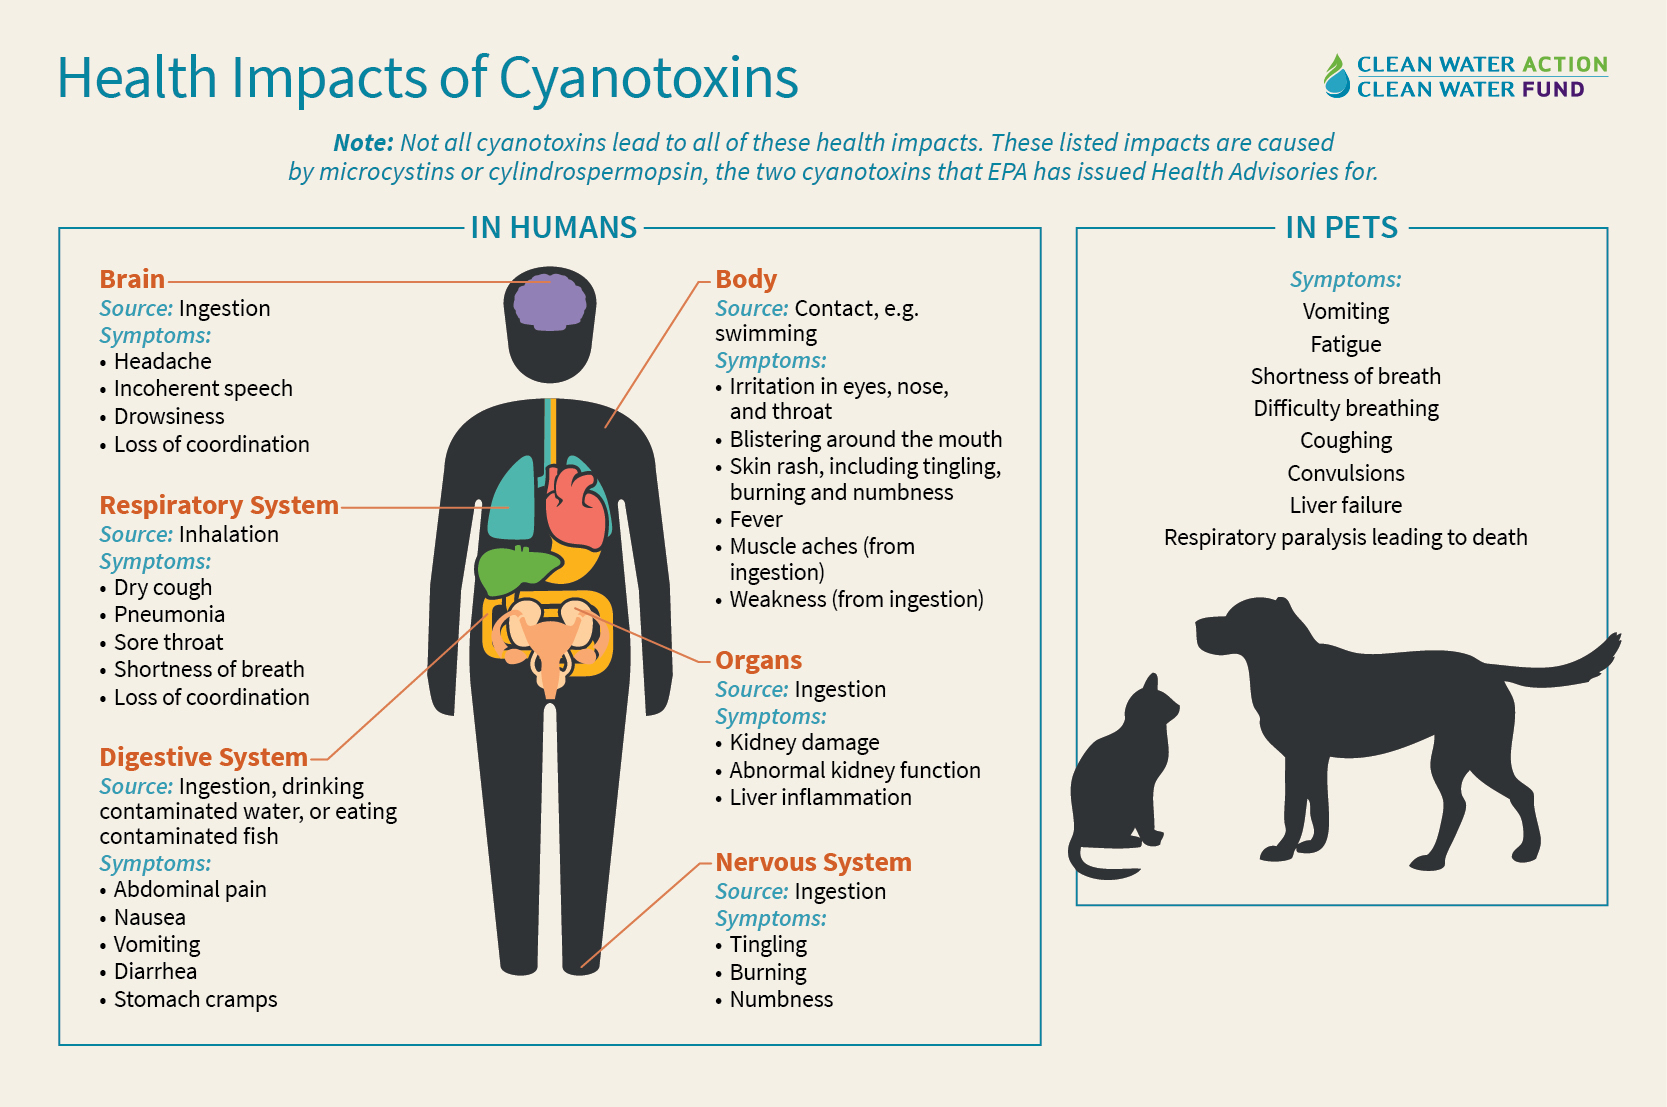 The Health Impacts of Cyanotoxins - Clean Water Action